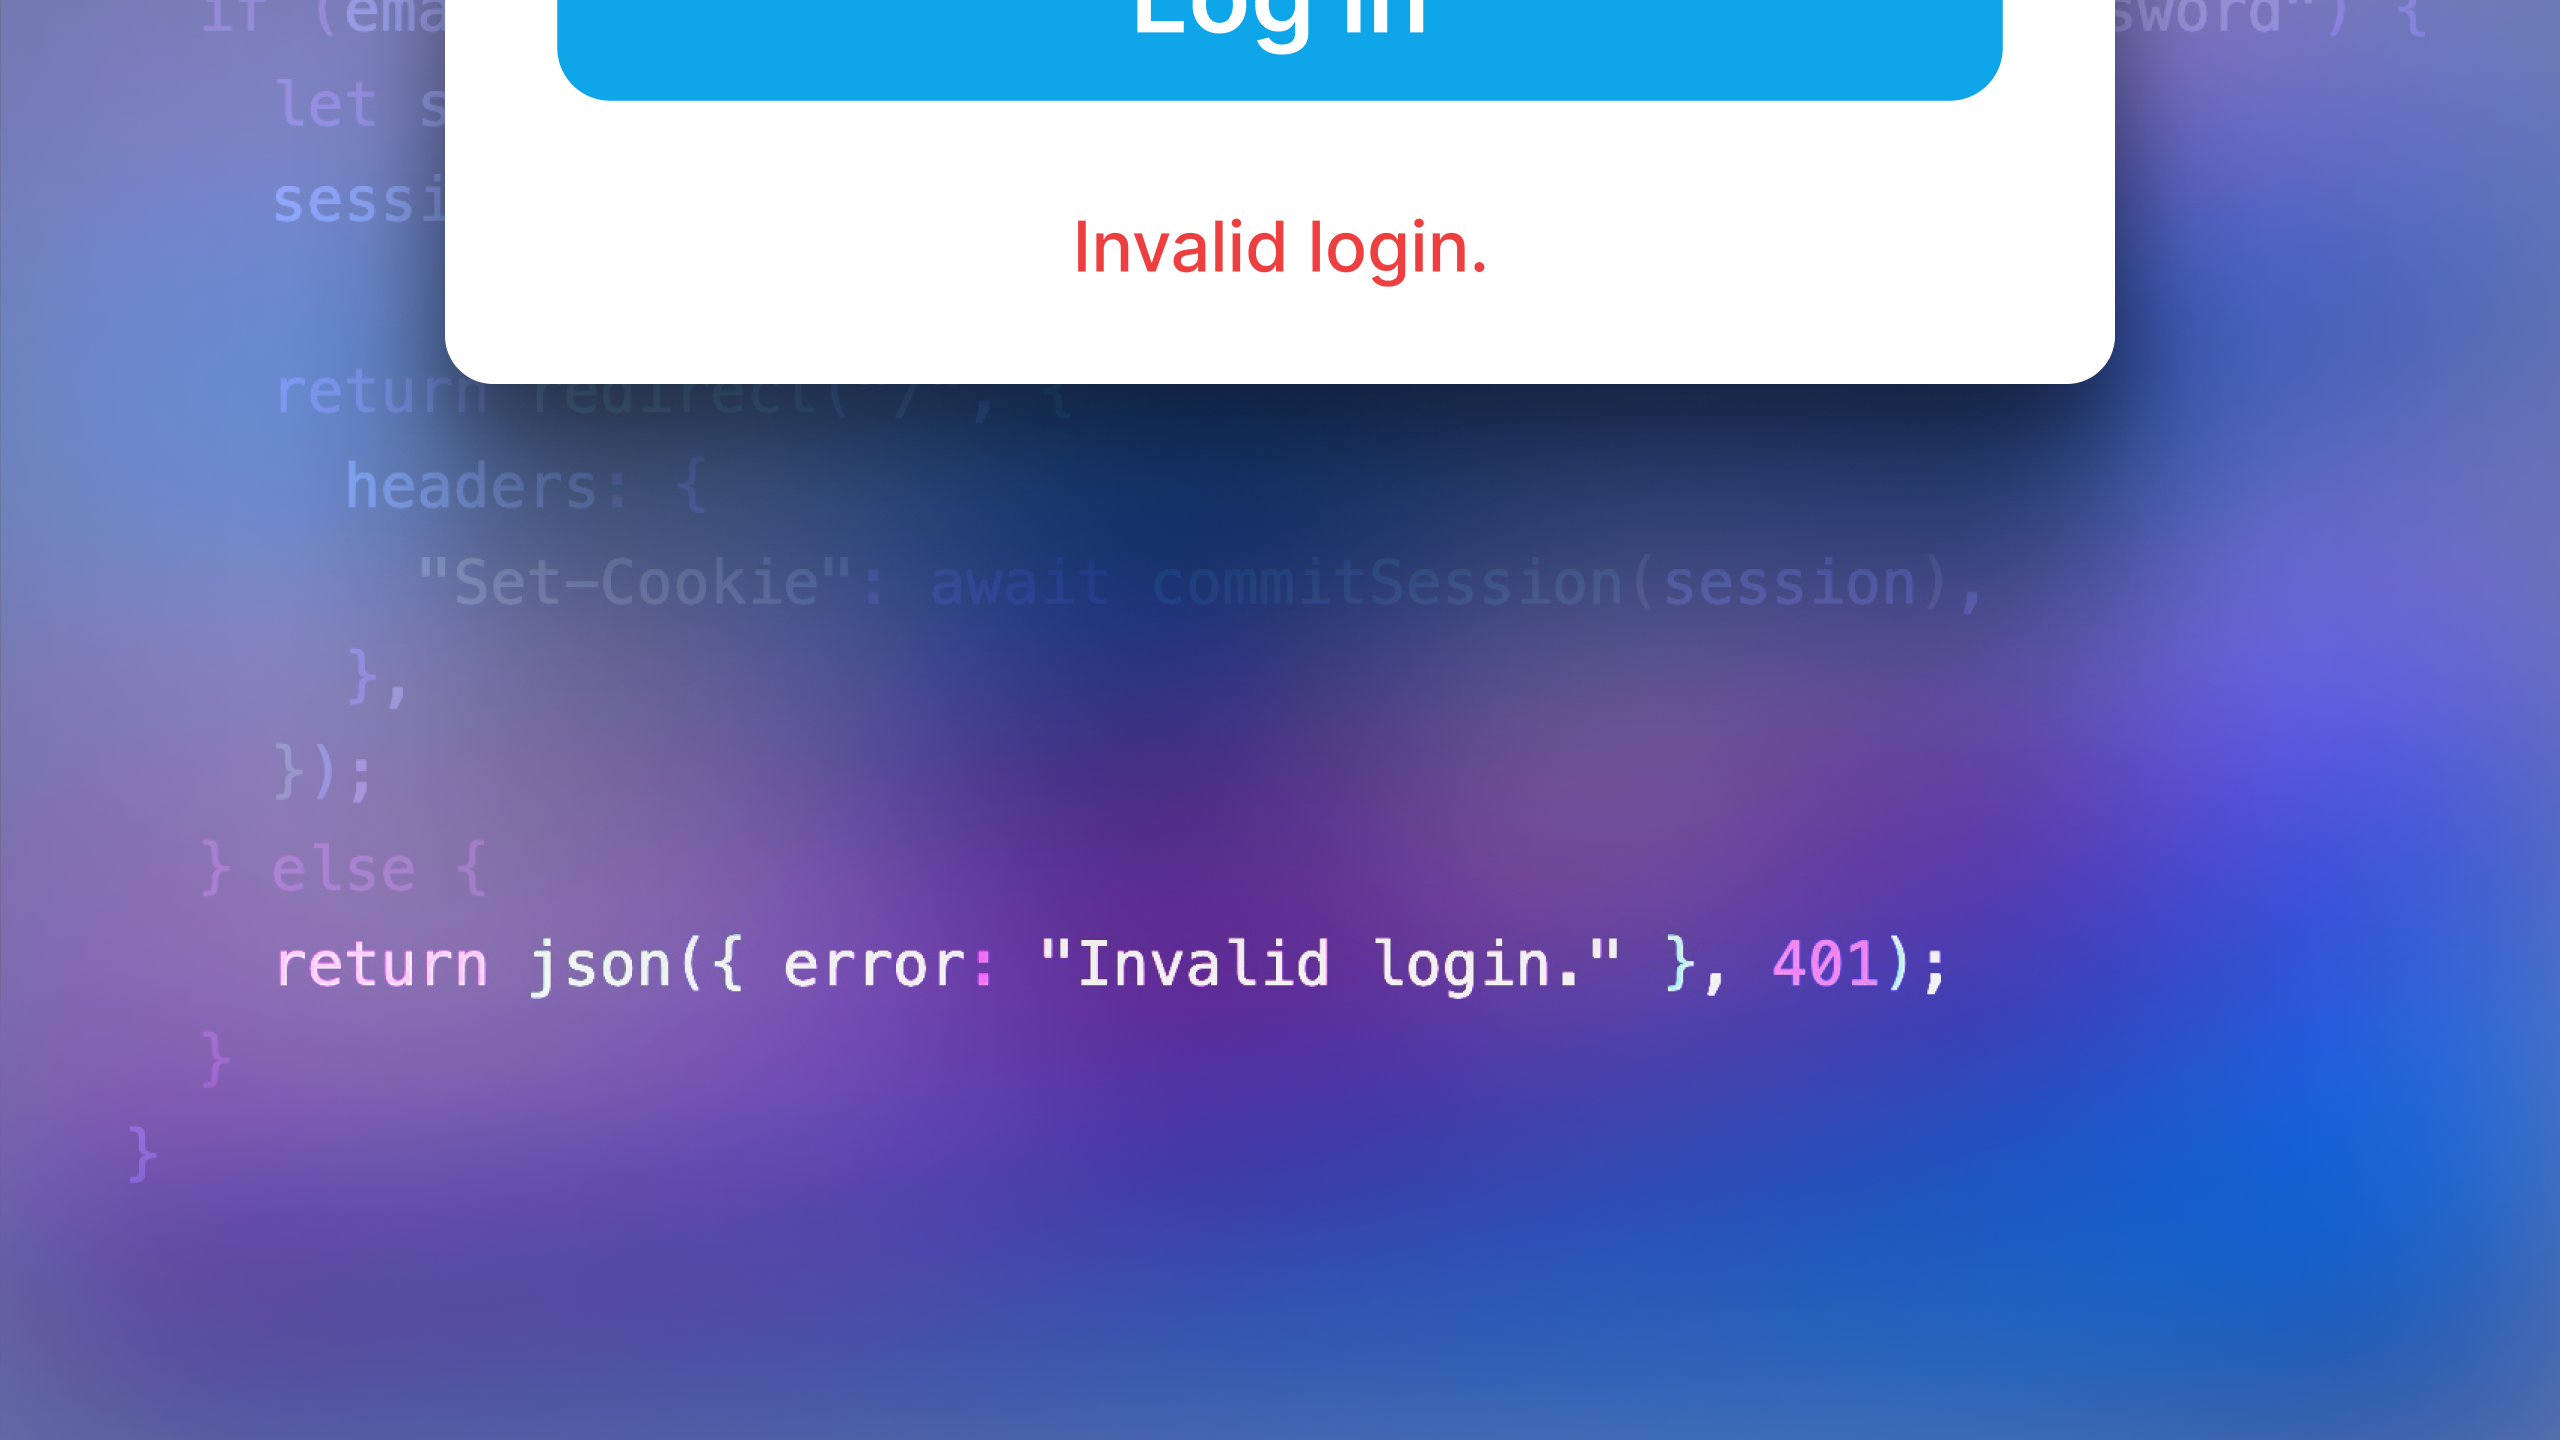 Adding error messages to the login form